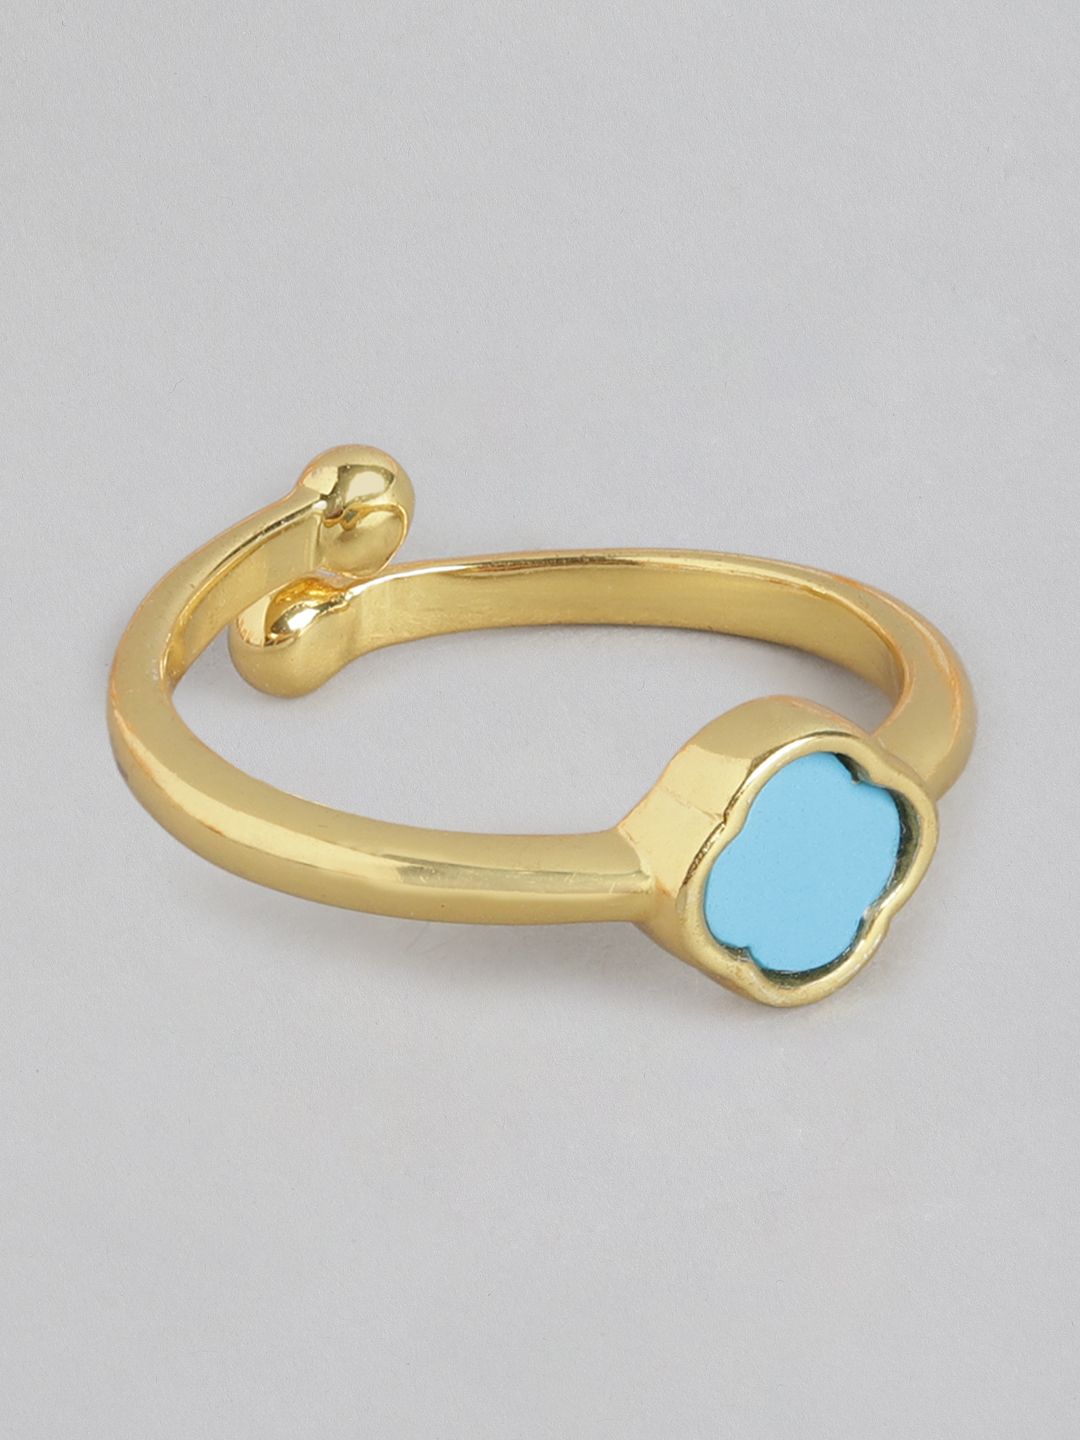 Carlton London Gold-Plated Adjustable Ring Price in India